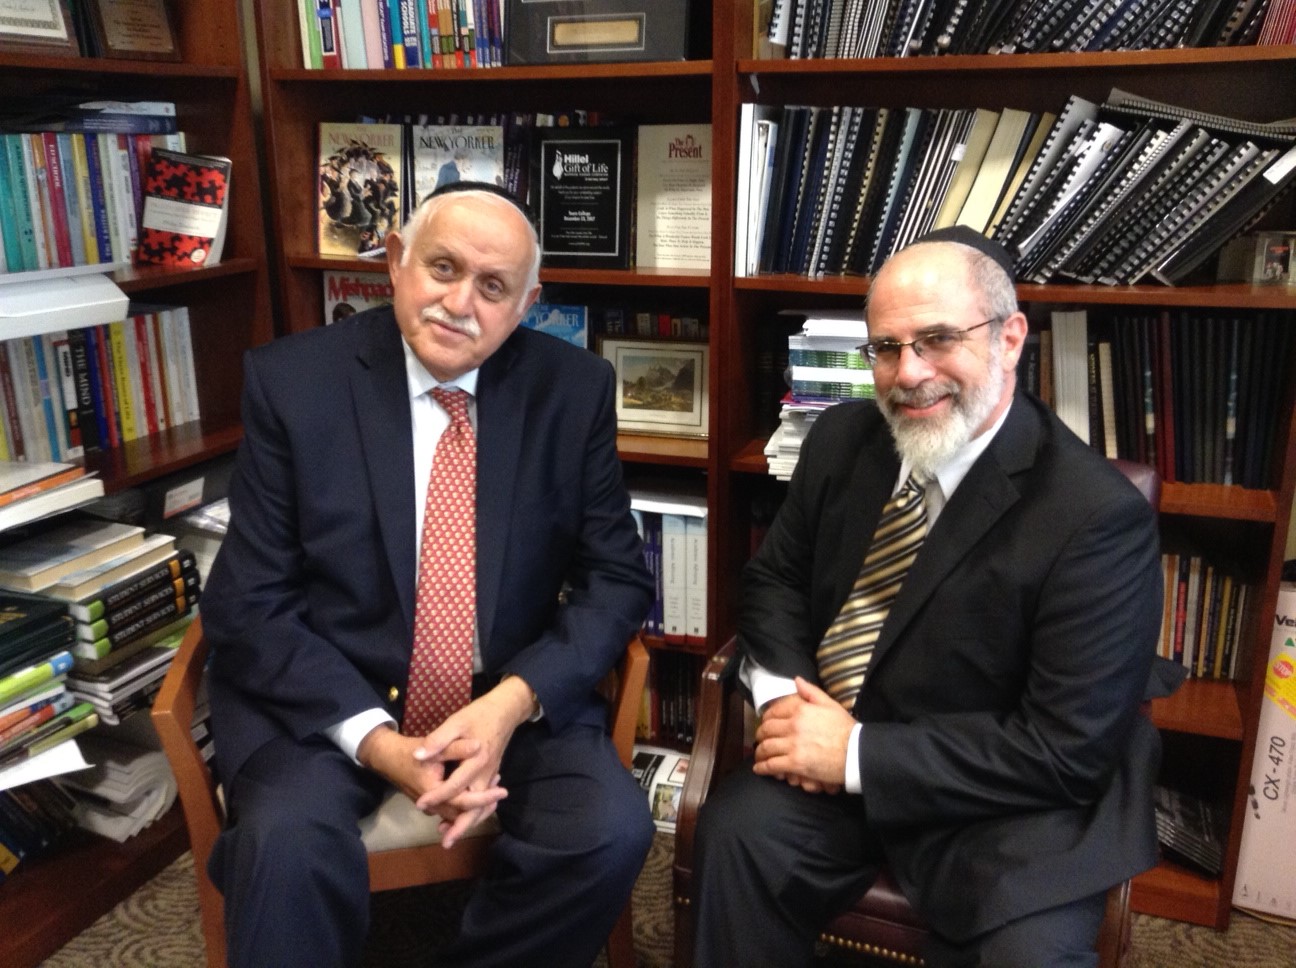 Dr. Henry Abramson (right), newly-appointed academic dean of the Lander College of Arts and Sciences in Flatbush (LAS), sits with Dr. Robert Goldschmidt, executive dean of LAS and Touro’s vice president for planning and assessment.